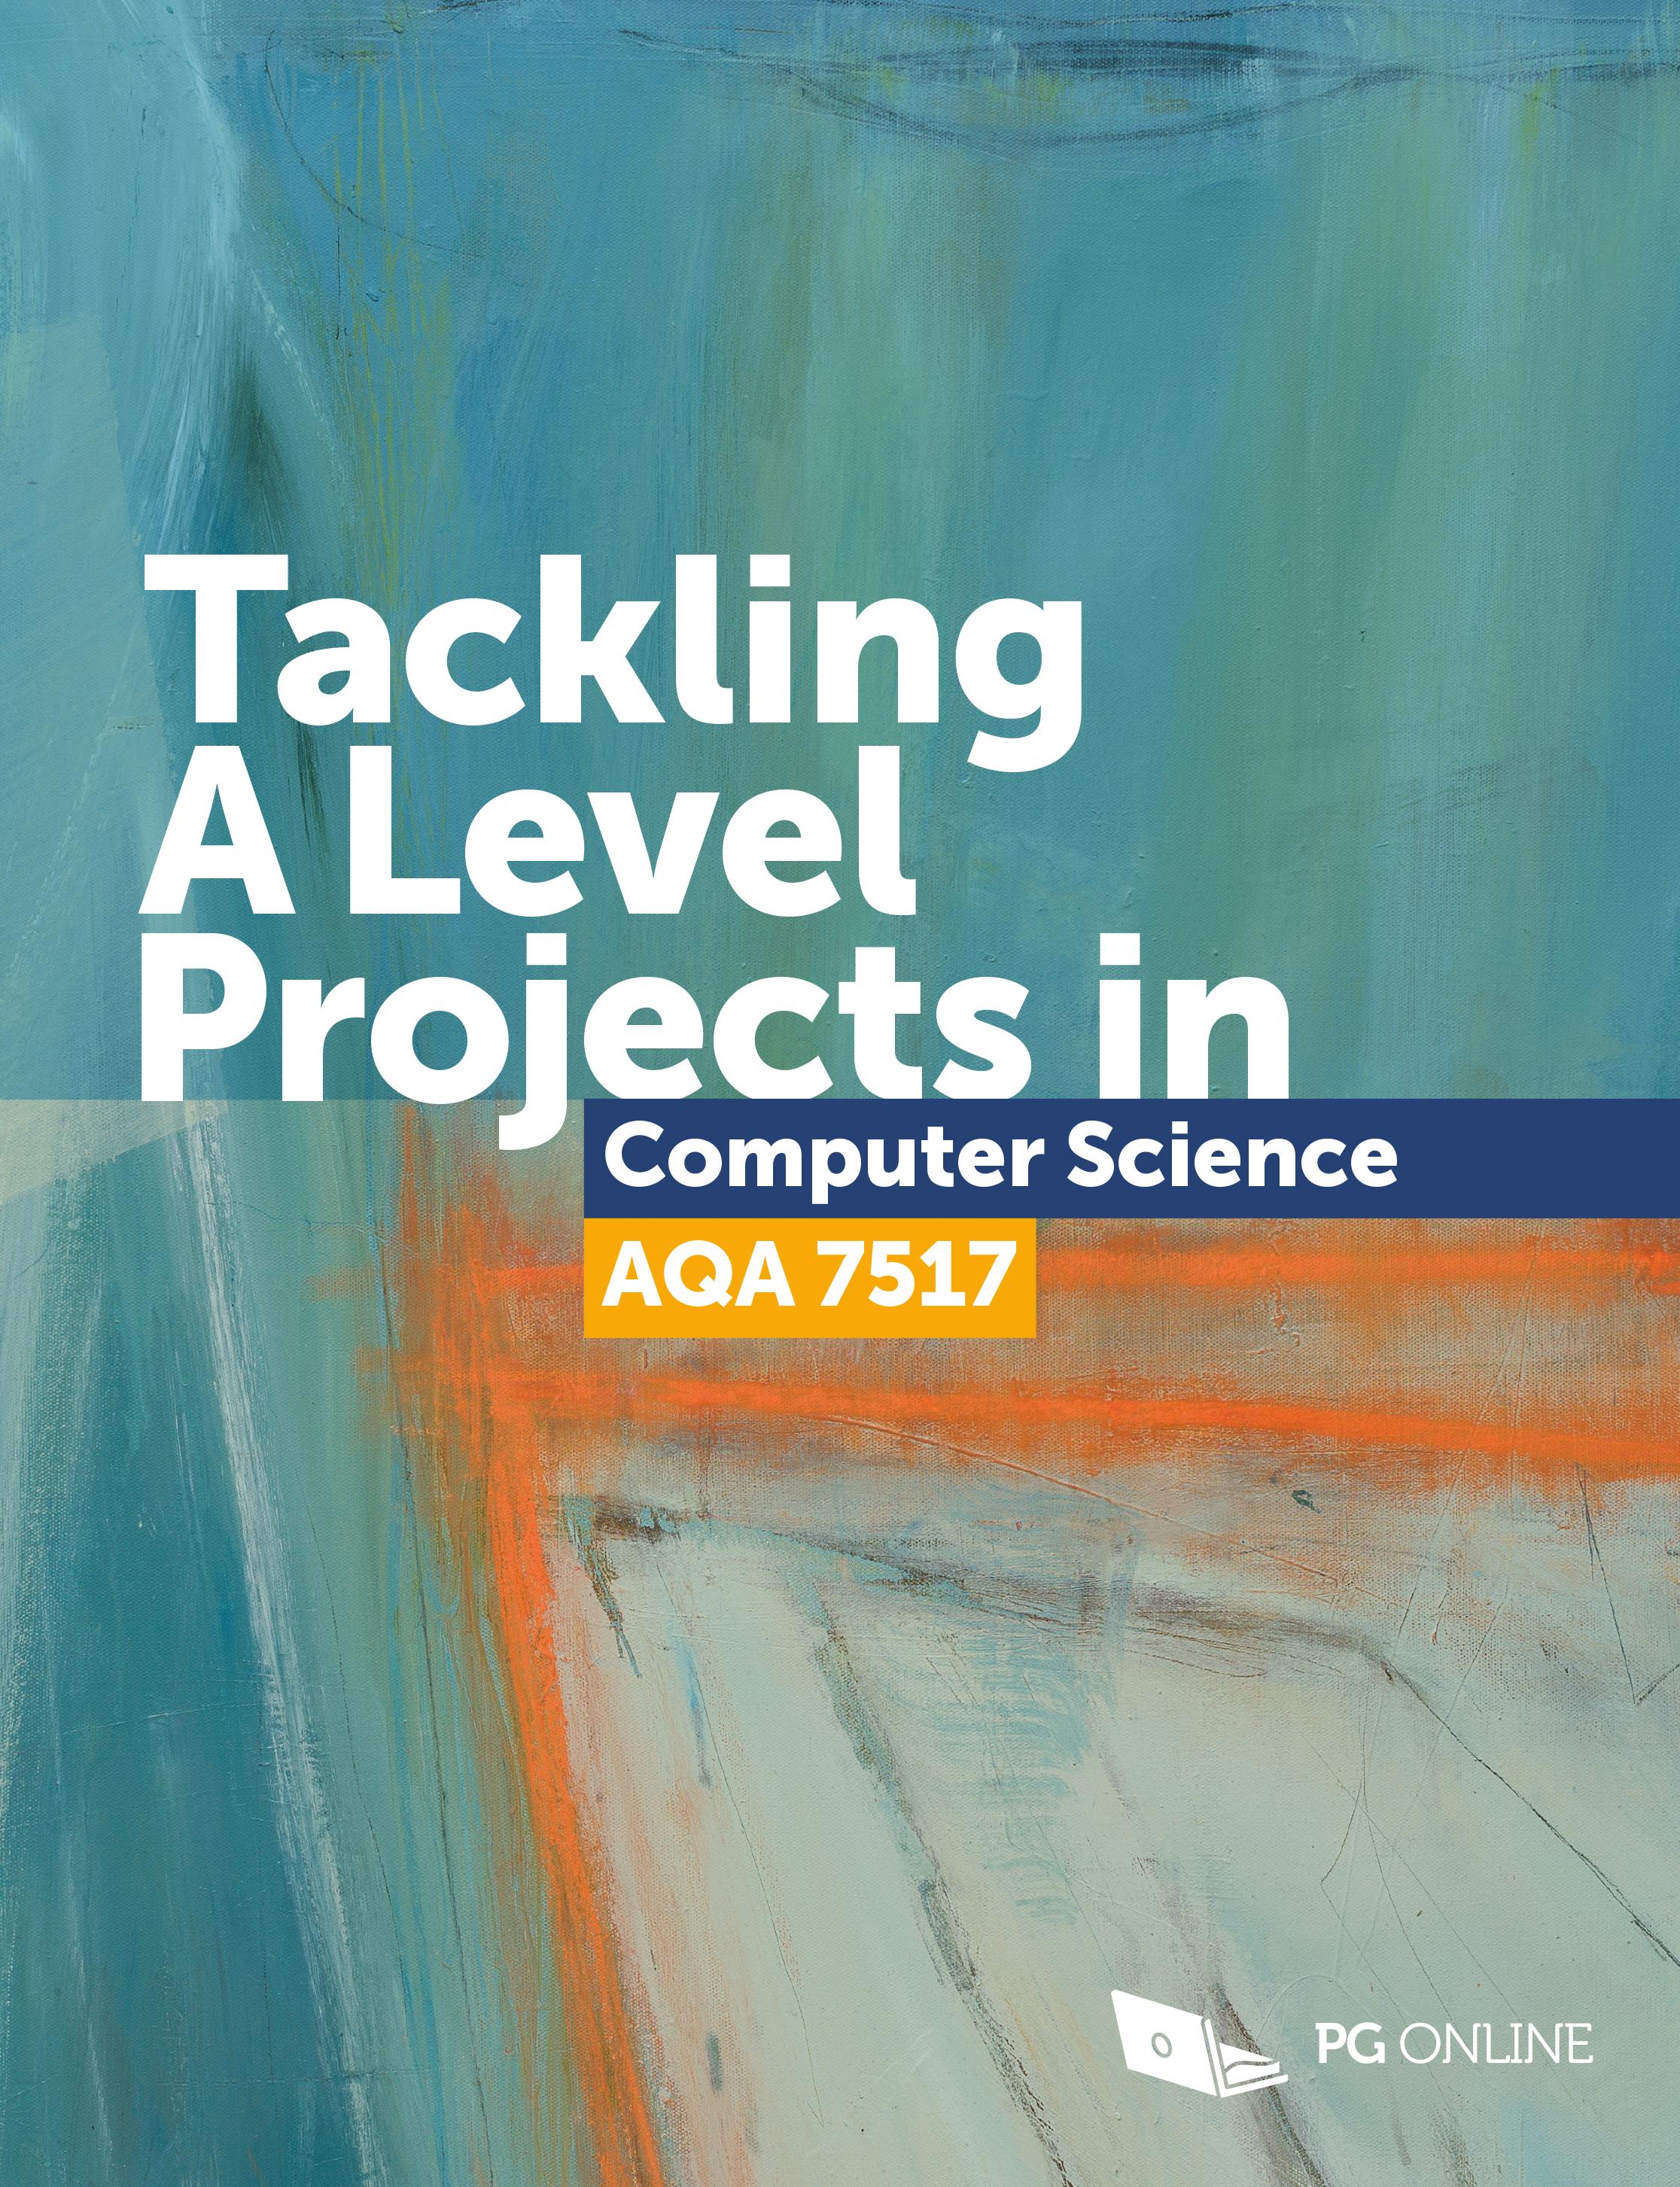 Tackling A Level Projects in Computer Science AQA 7517 - PG Online